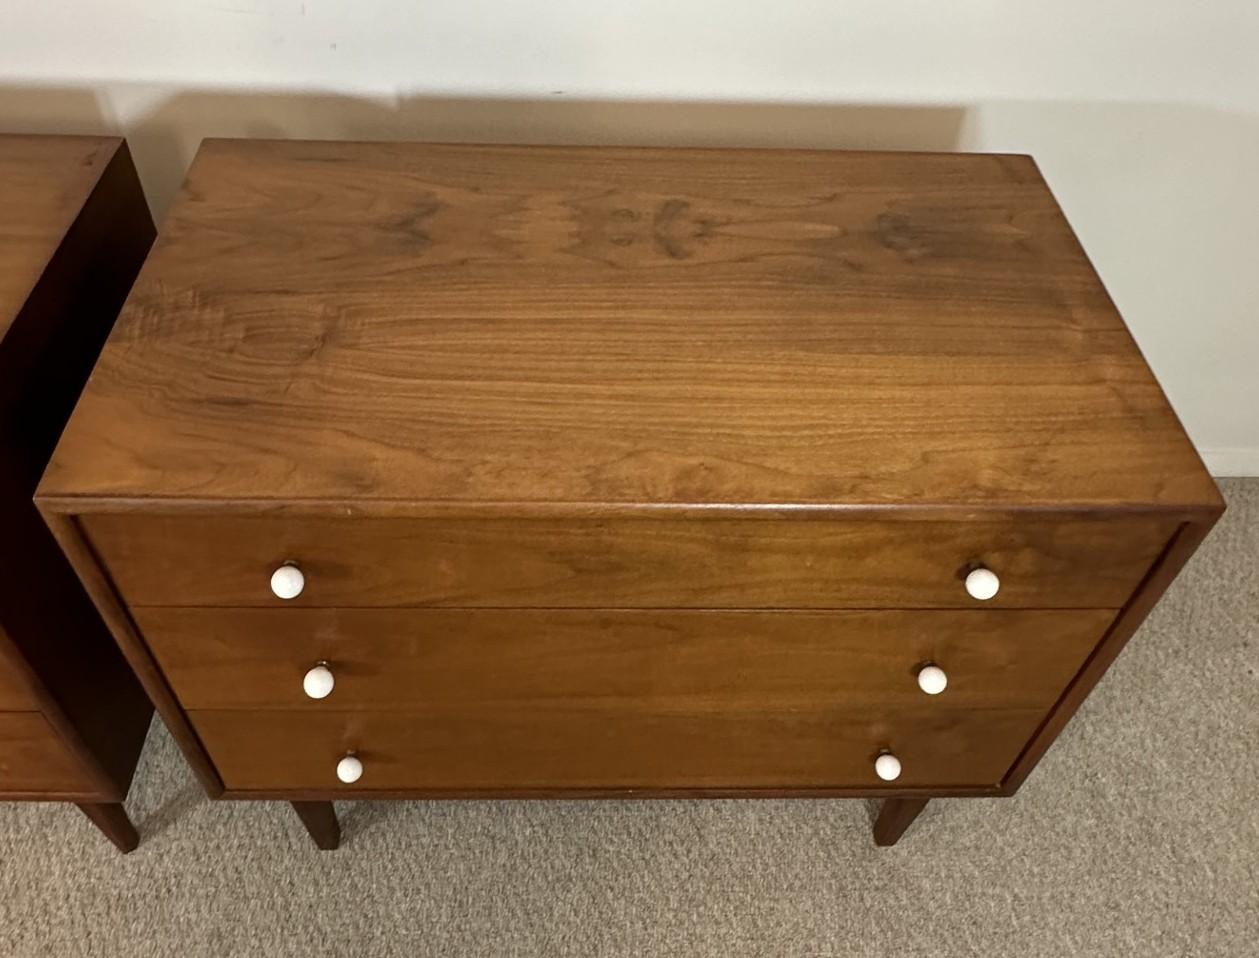 Pair of Kipp Stewart Walnut Bachelor Chests by Drexel In Good Condition For Sale In Toledo, OH